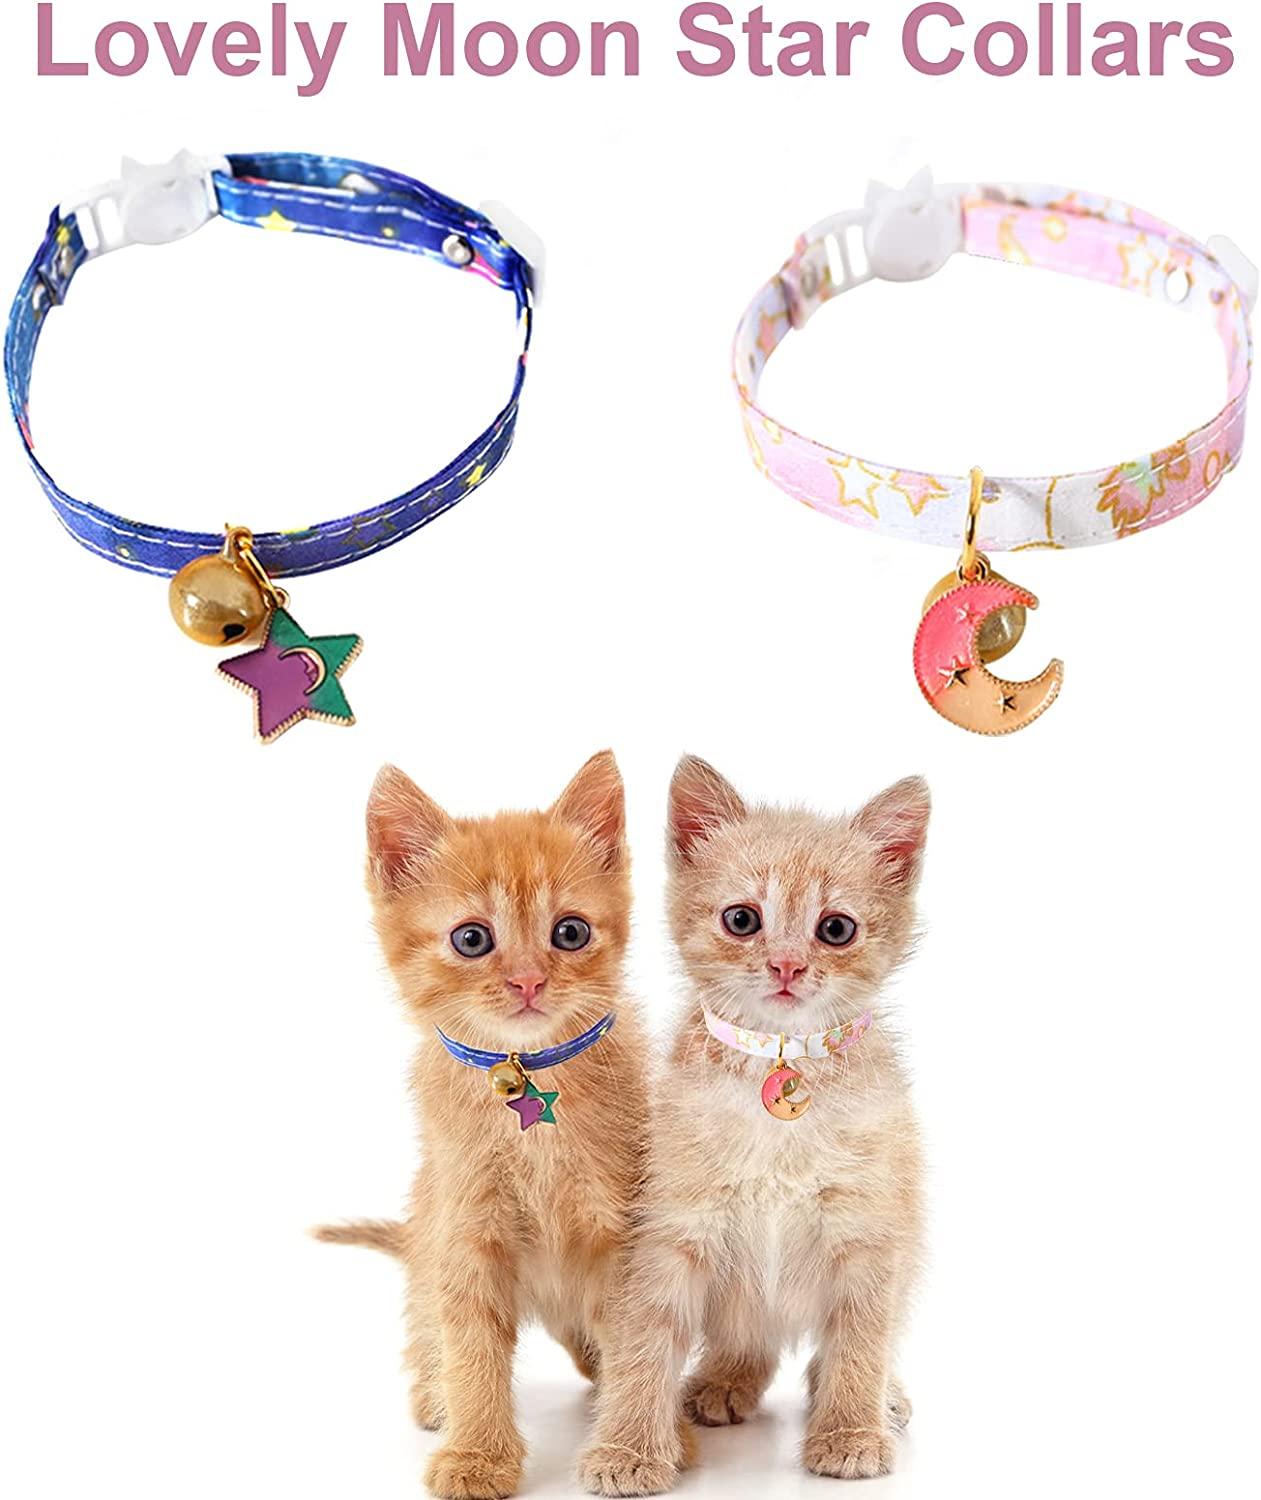 HACRAHO Breakaway Cat Collar with Bell, 2 PCS Adjustable Cute Kitty Collar  with Bells Moon Stars Safety Breakaway Cat Collar for Cats Kittens Puppies,  Pink and Blue